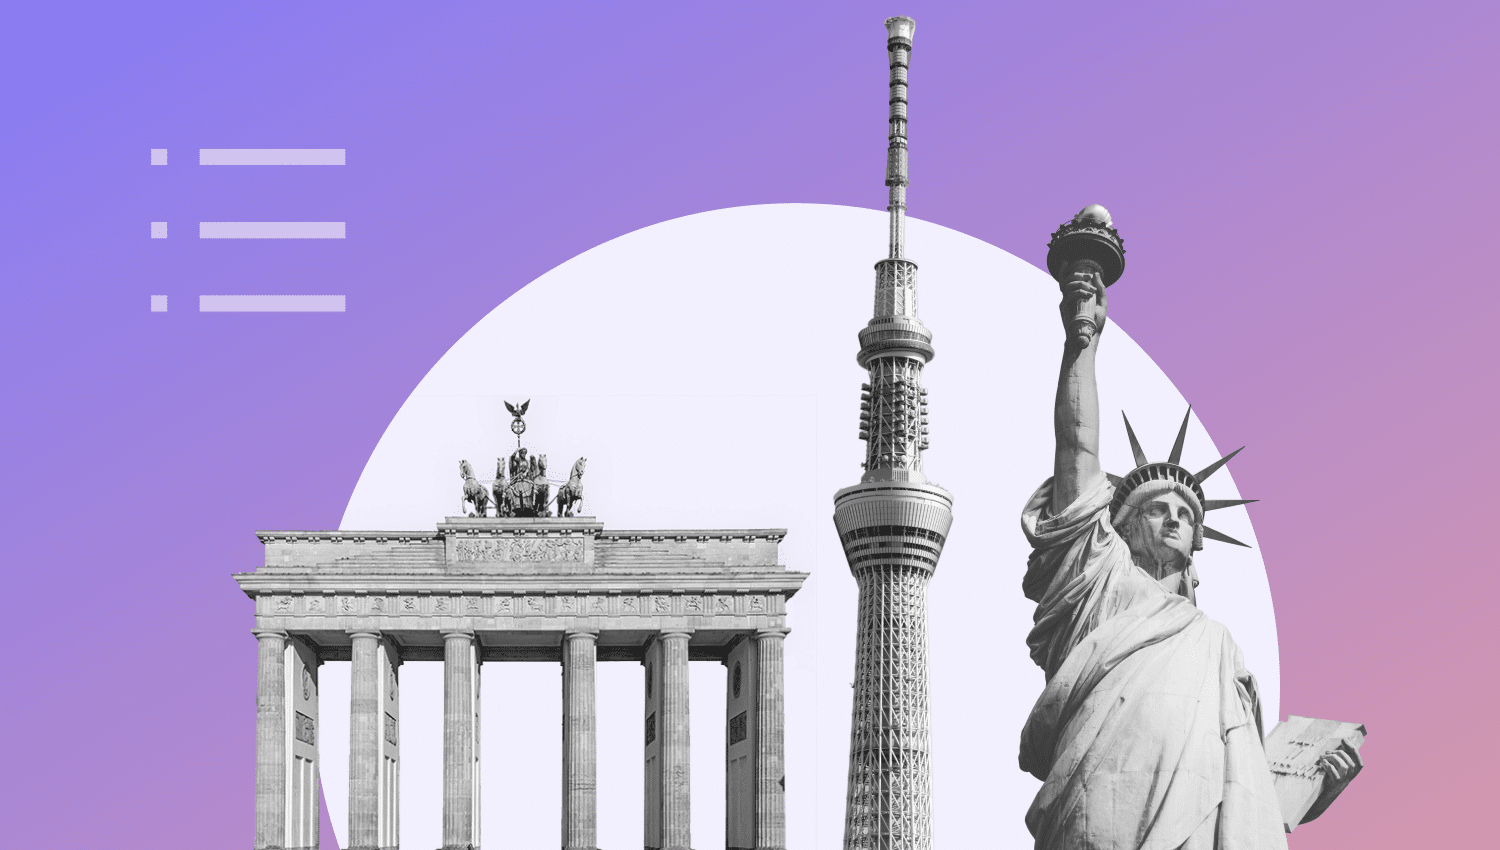 Brandenburg Gate, Tokyo Skytree and Statue of Liberty in front of a gray-purple background.